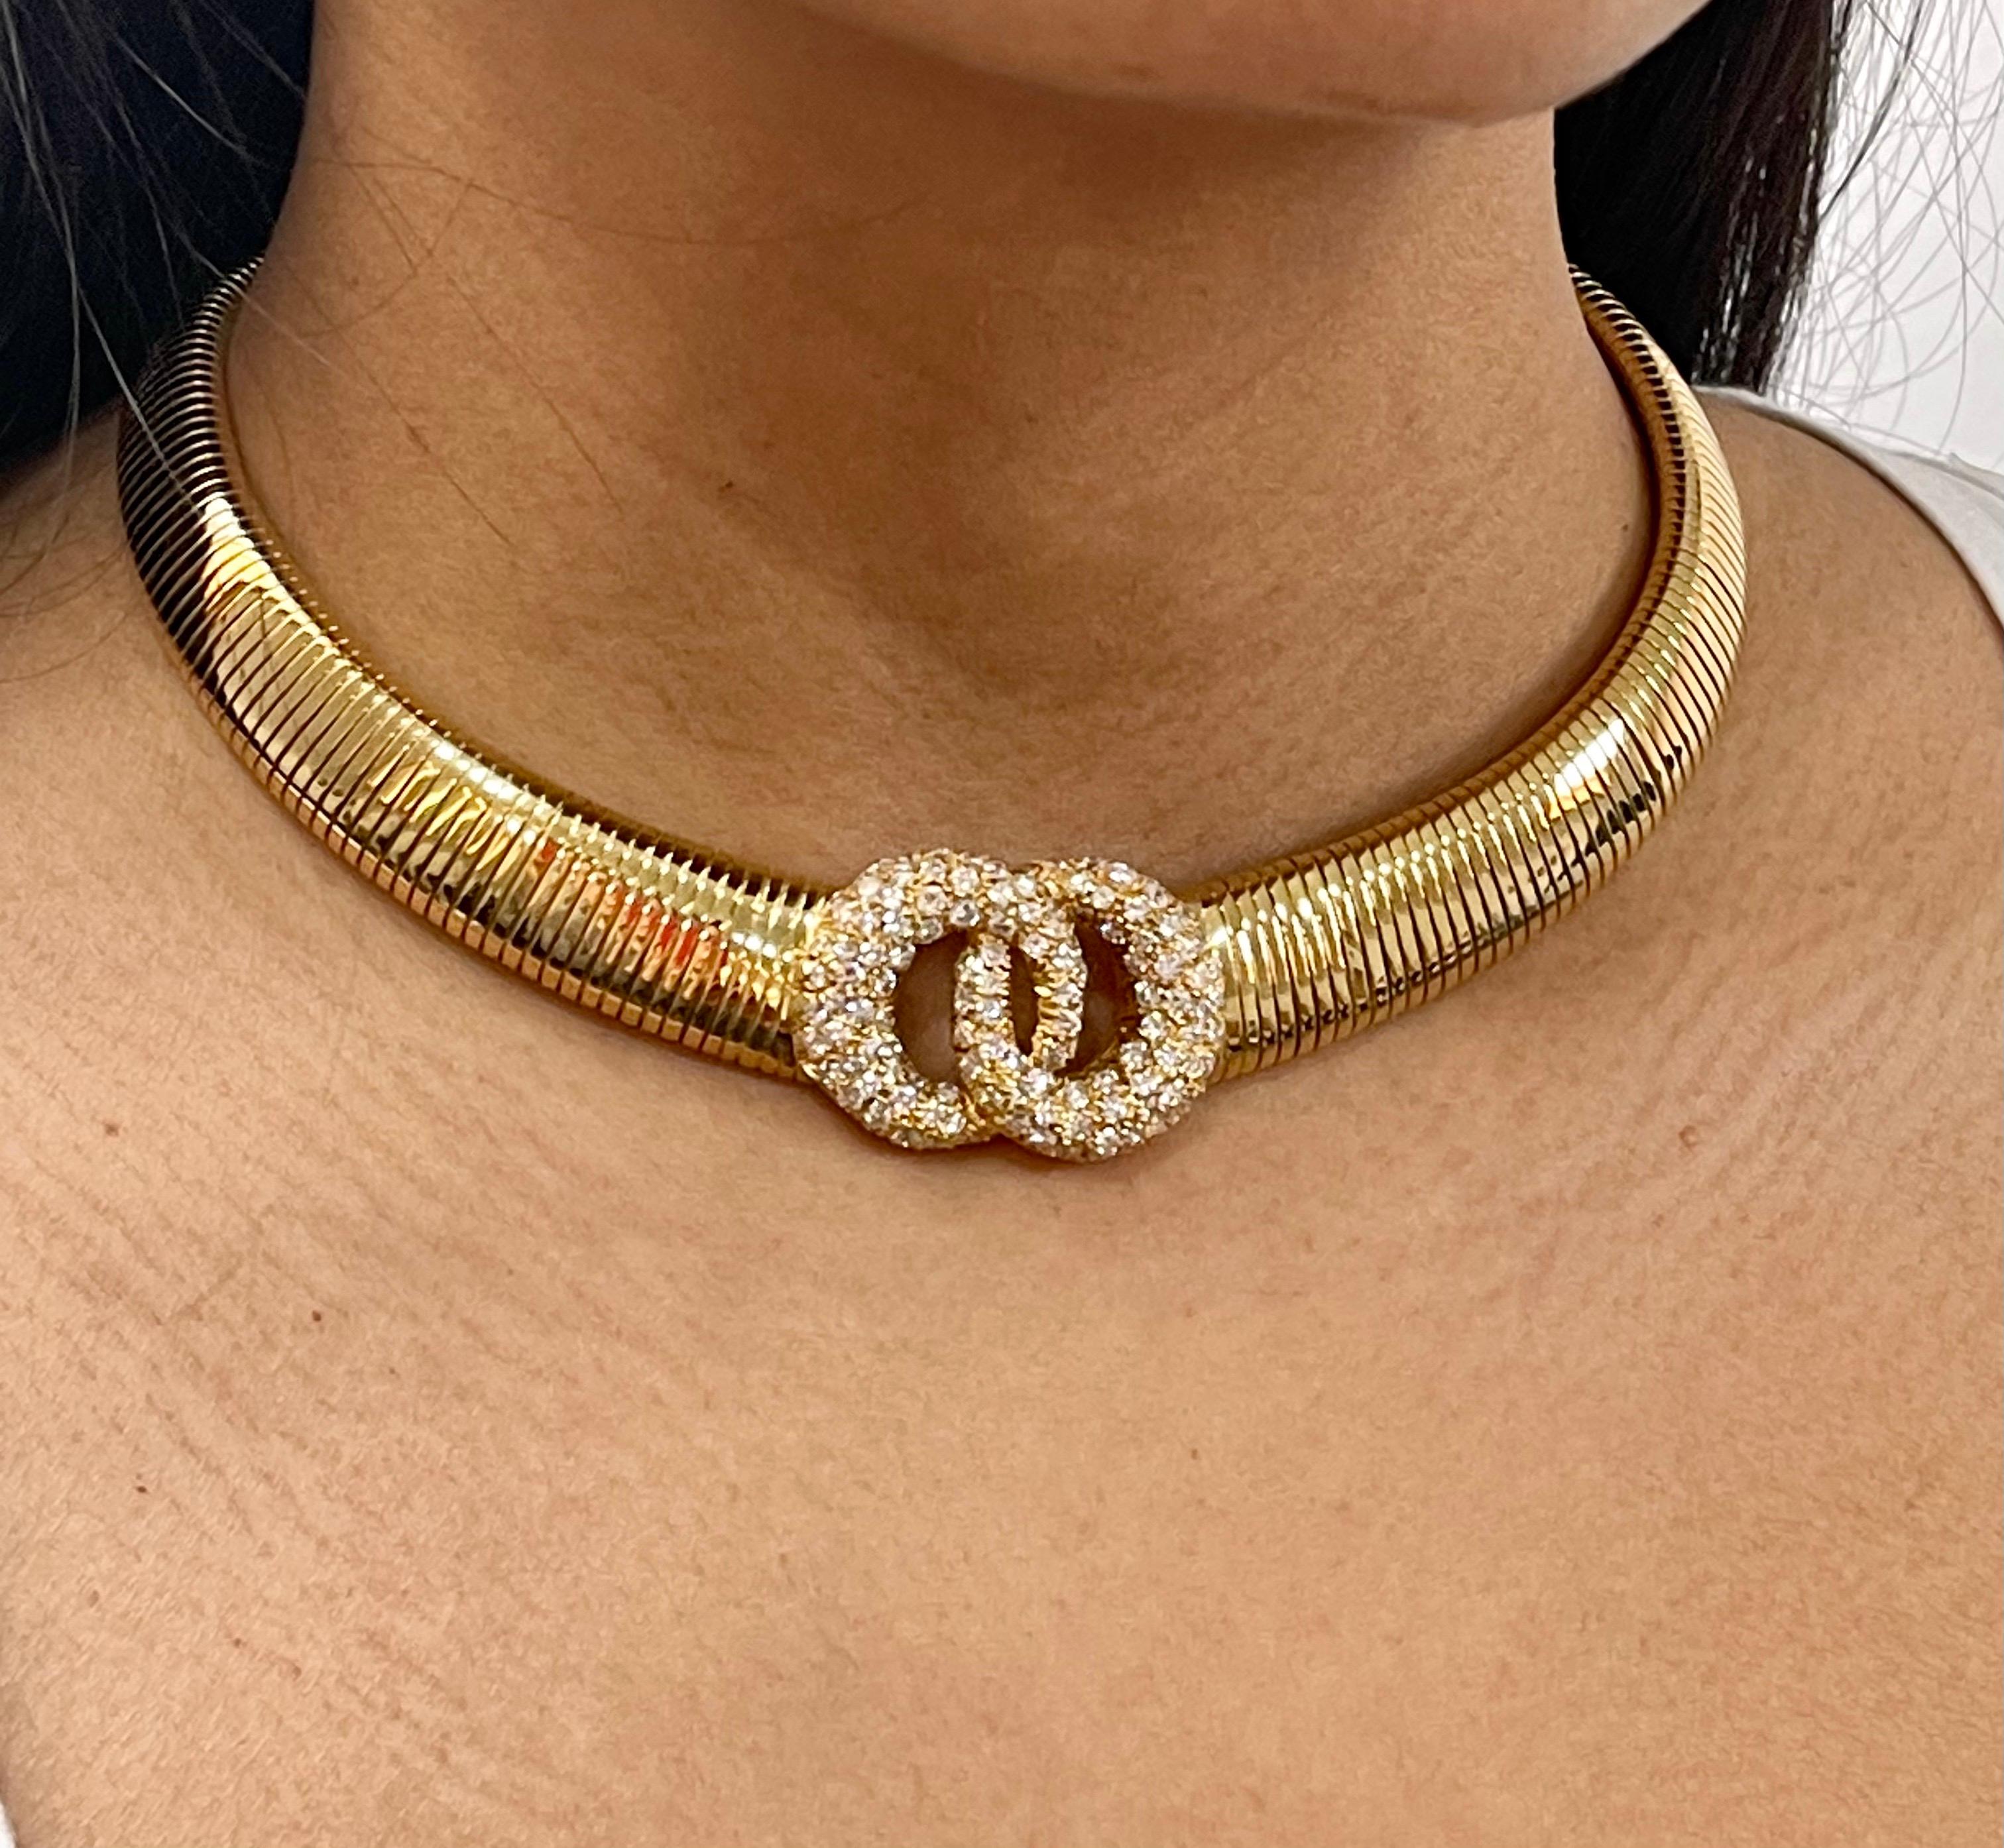 Round Cut Van Cleef & Arpels 18 Carat Yellow Gold and 6 Ct Diamond Collar/Choker Necklace For Sale